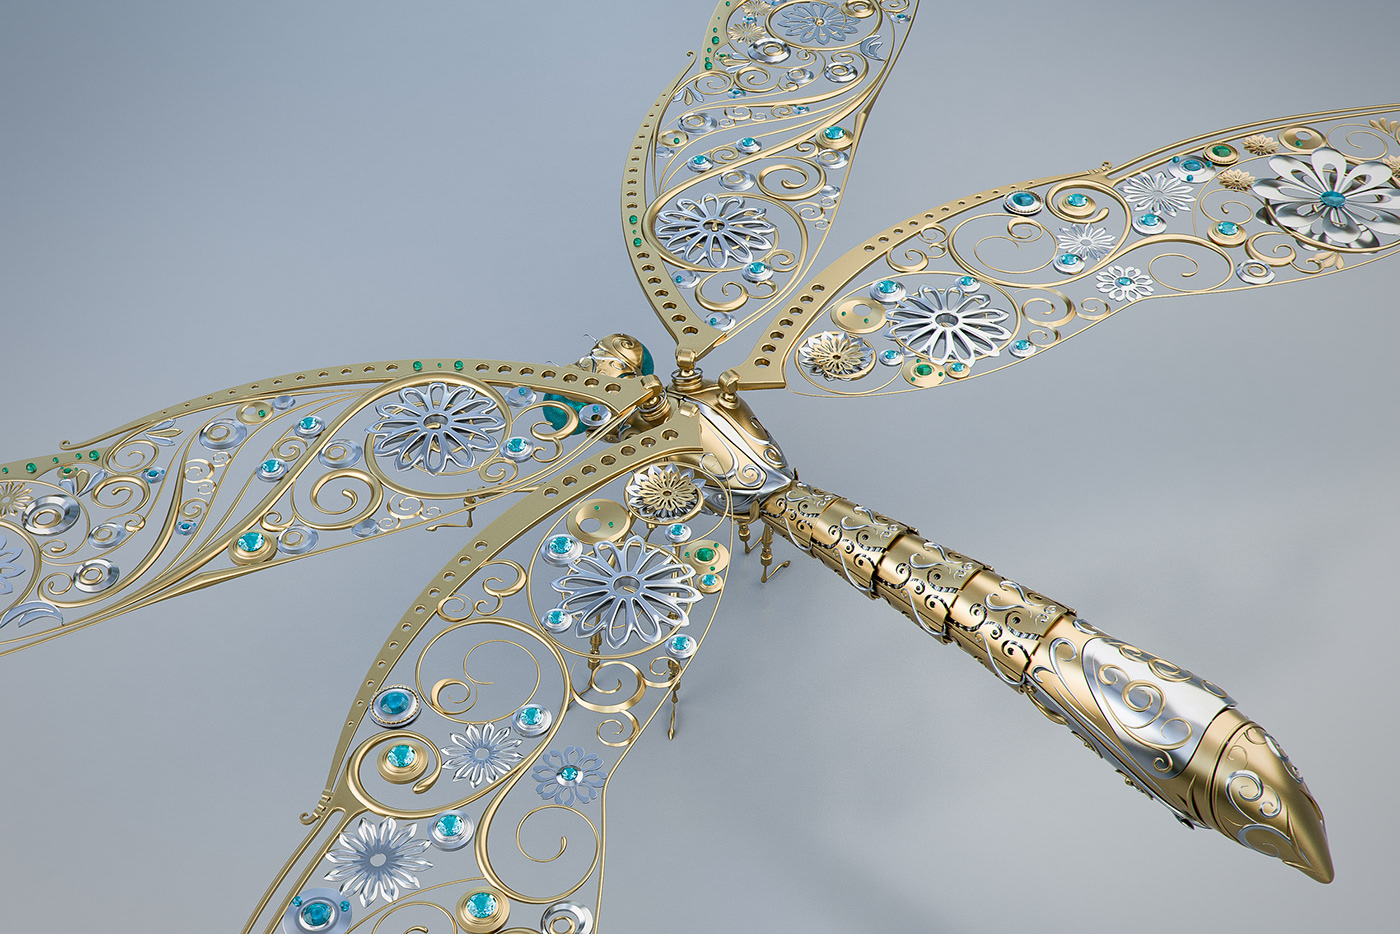 hard surface jewelry gold dragonfly ornament detail